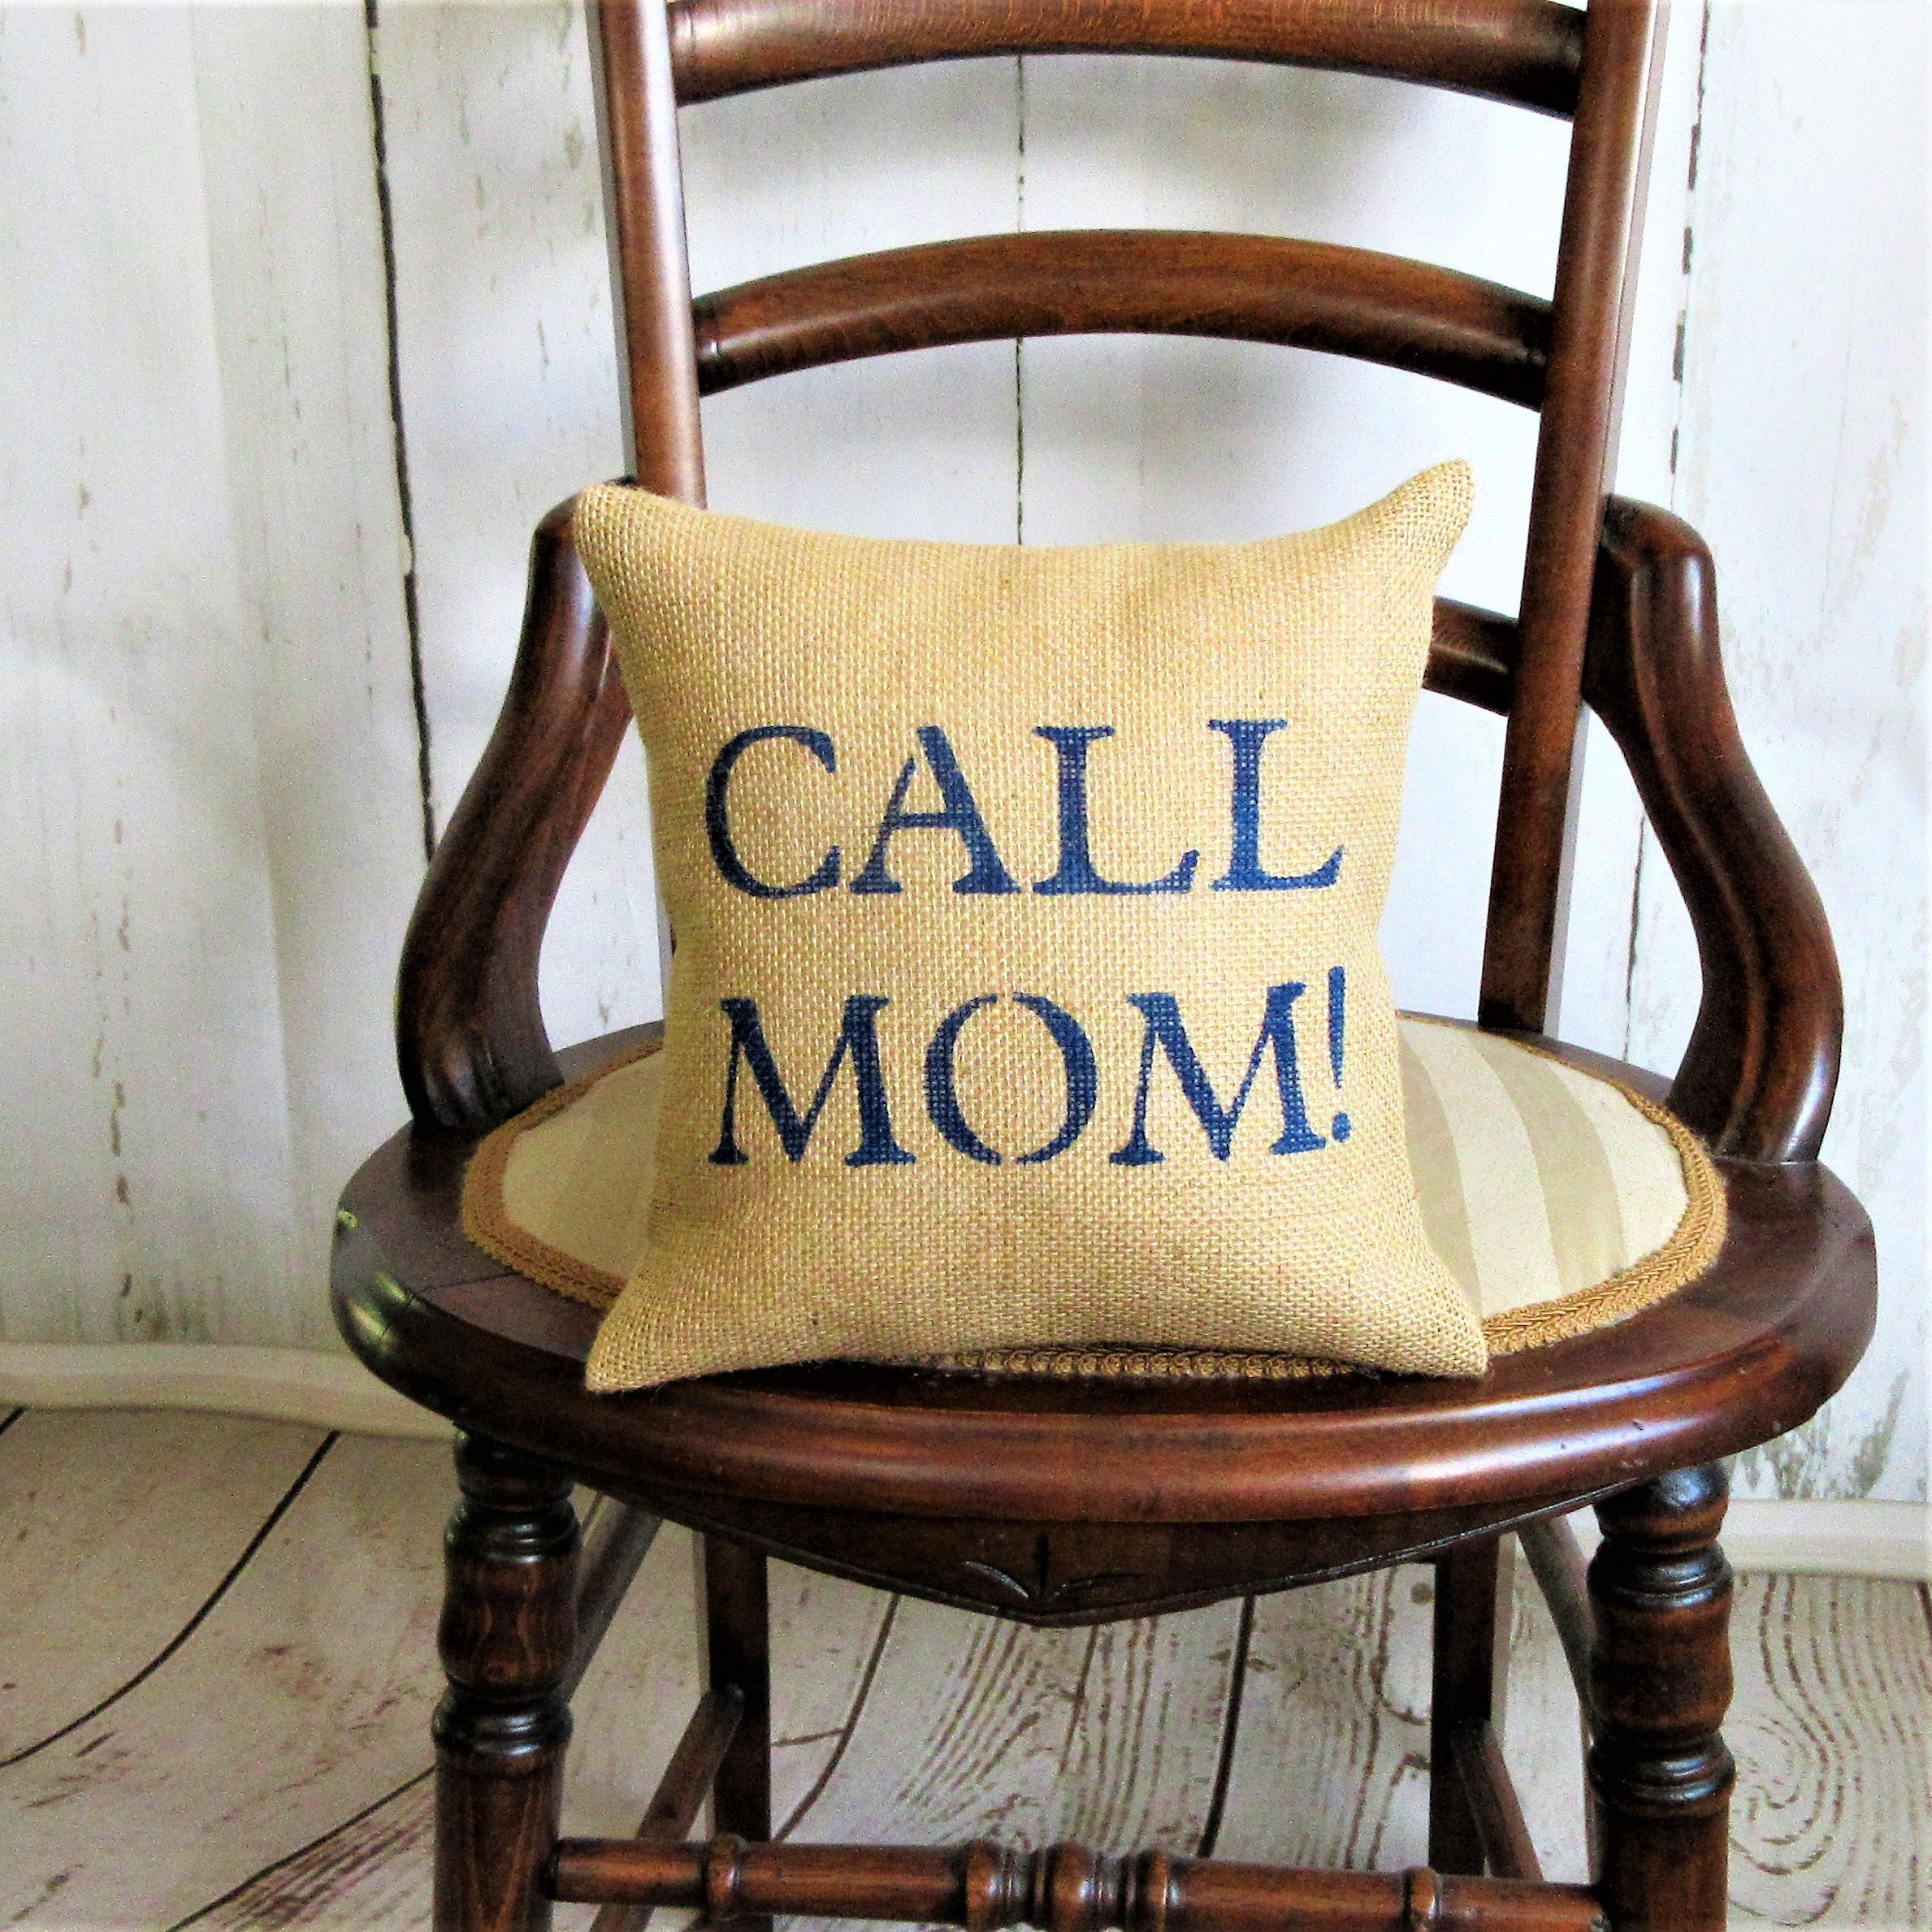 Call Mom or Text Mom Burlap Pillow